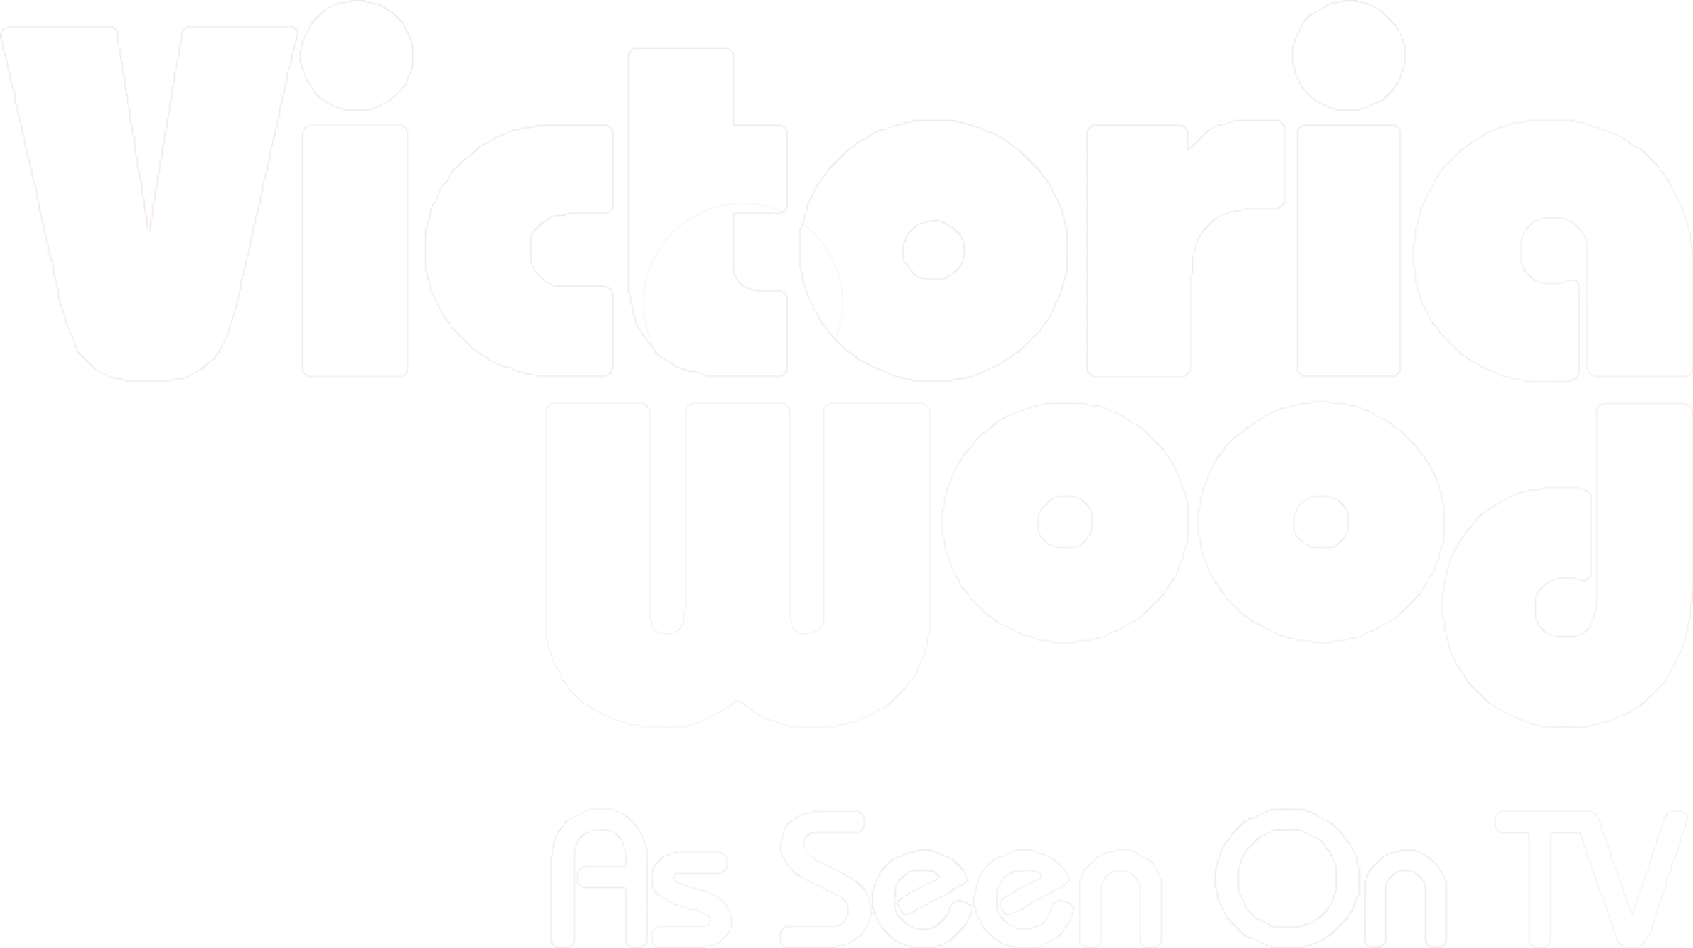 Victoria Wood As Seen On TV logo